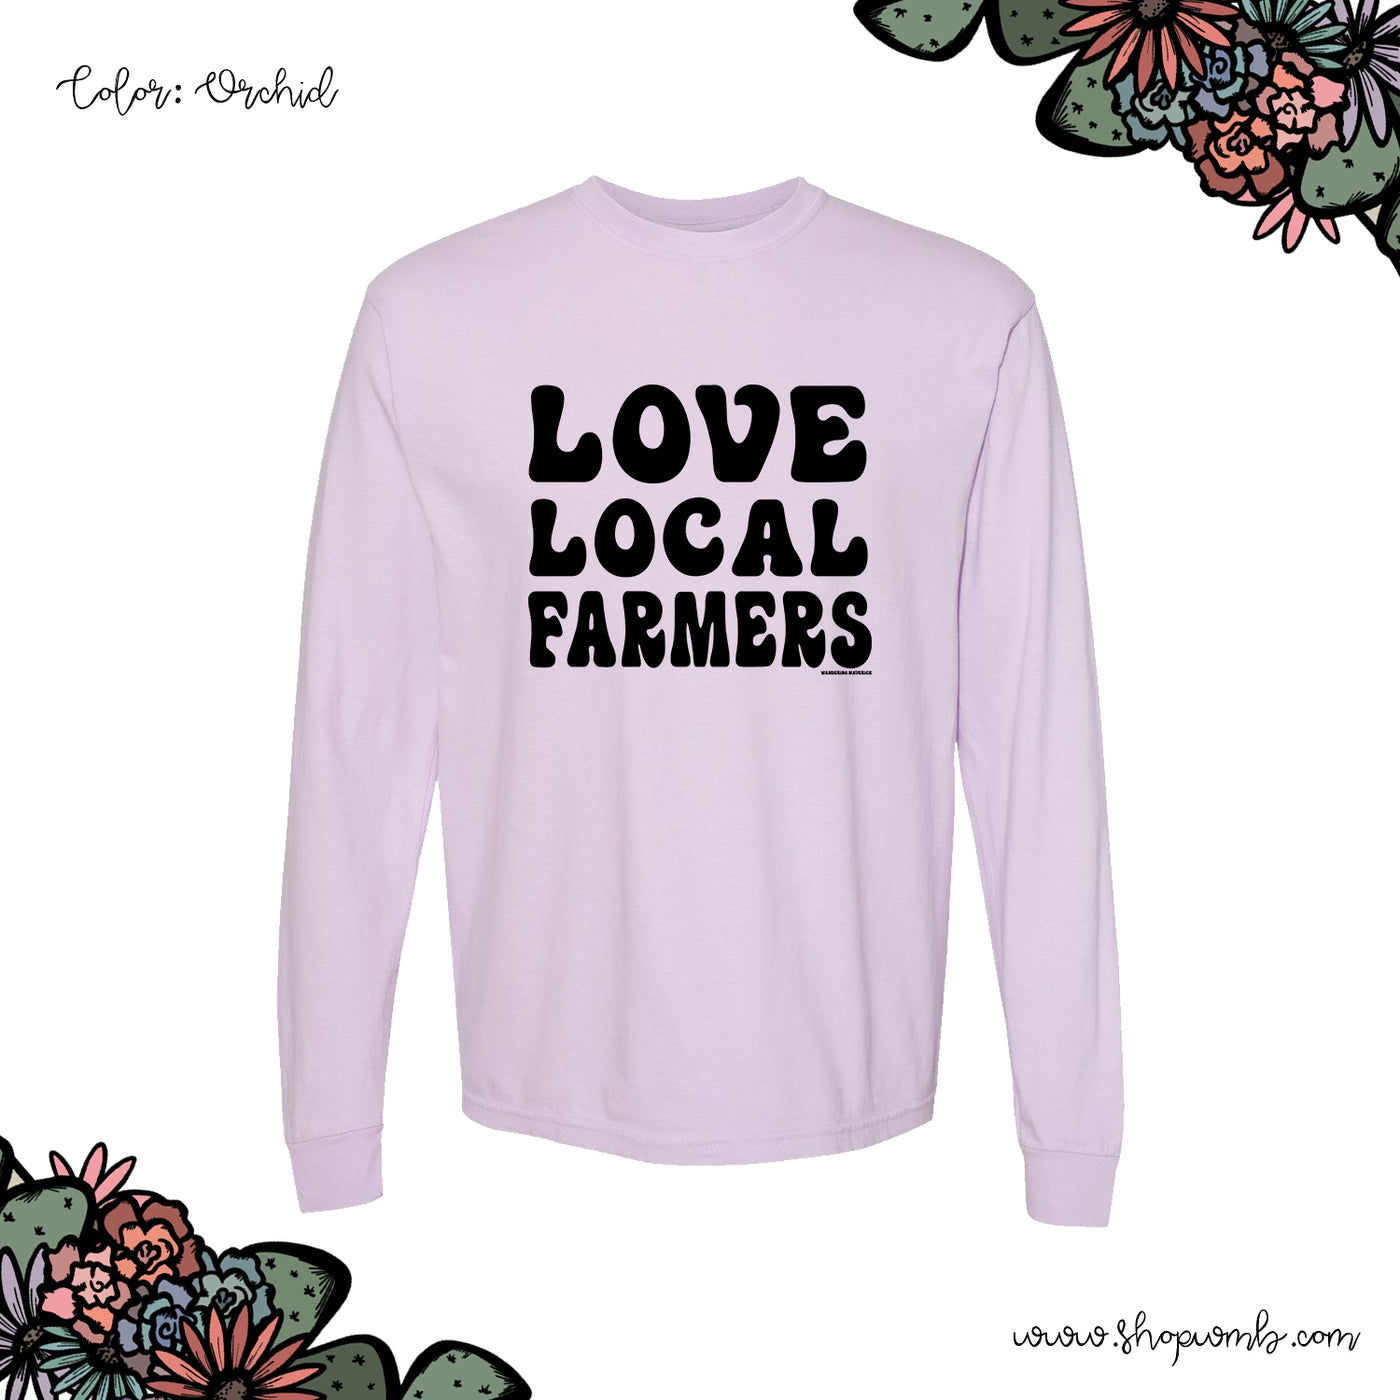 LOVE LOCAL FARMERS BLACK INK LONG SLEEVE T-Shirt (S-3XL) - Multiple Colors!